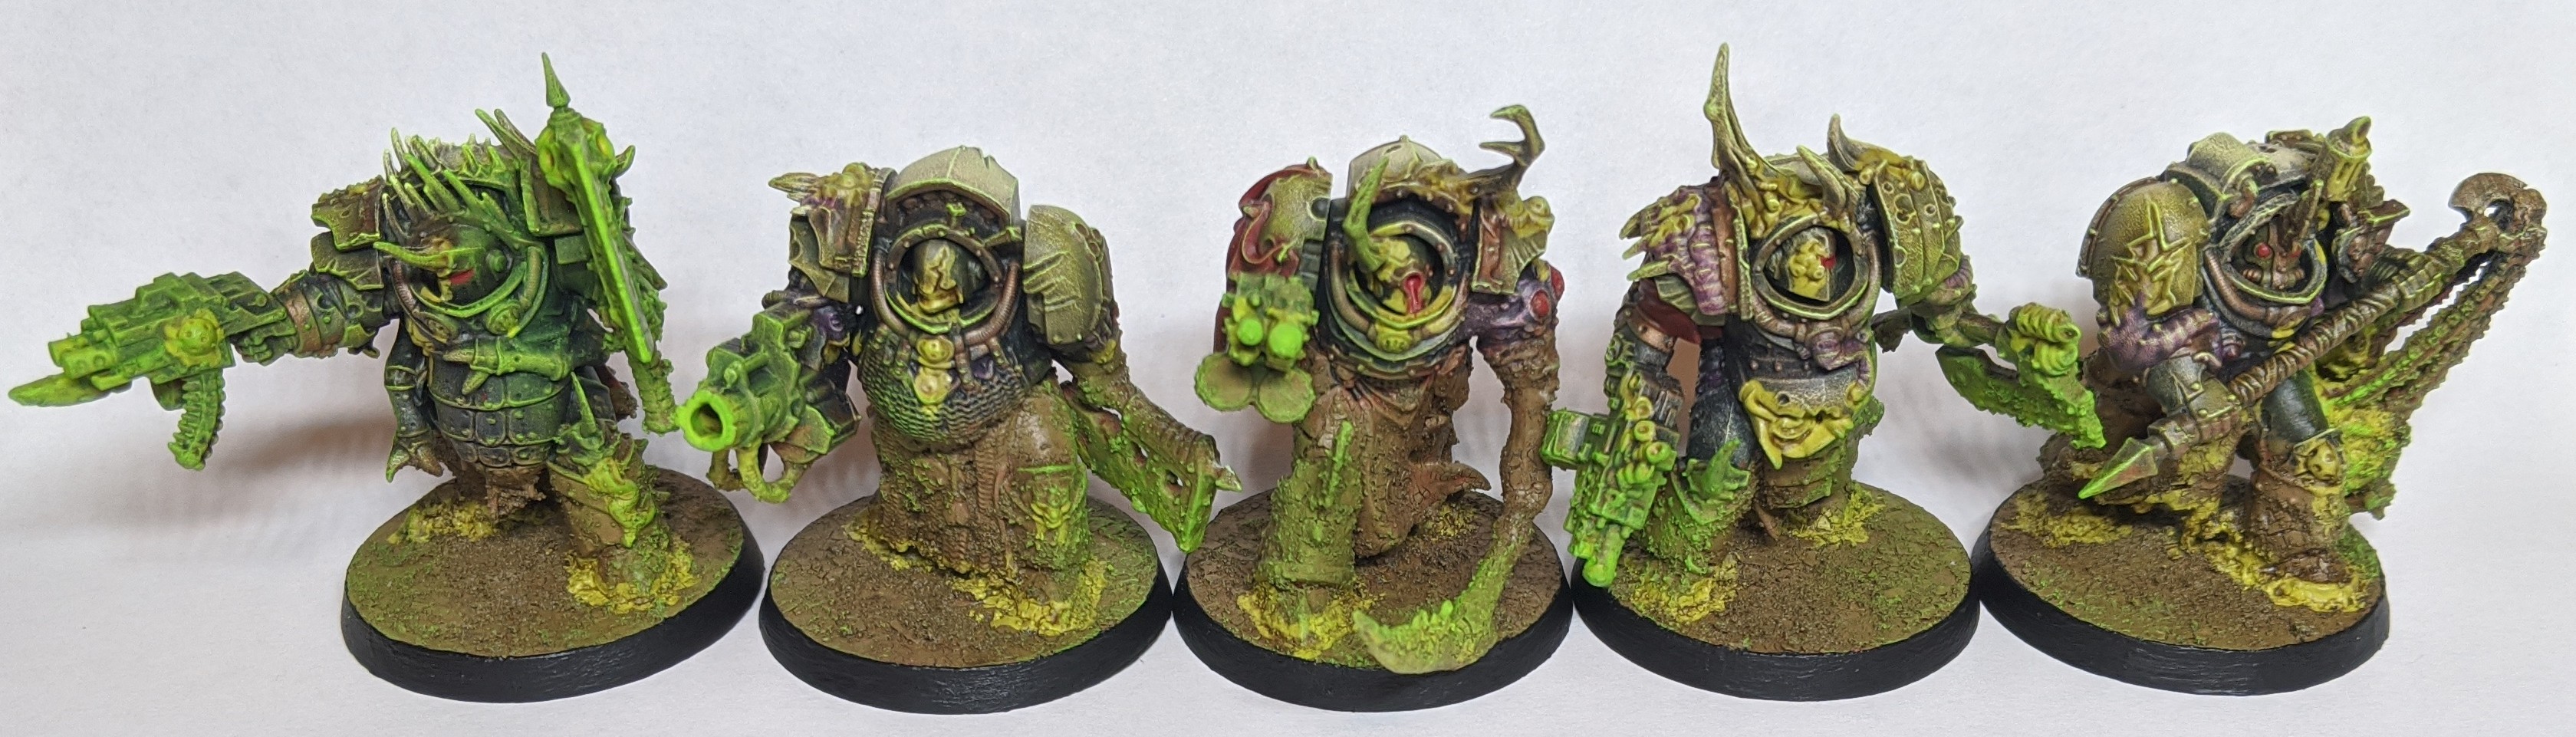 How To Play Death Guard In Warhammer 40K - Bell of Lost Souls